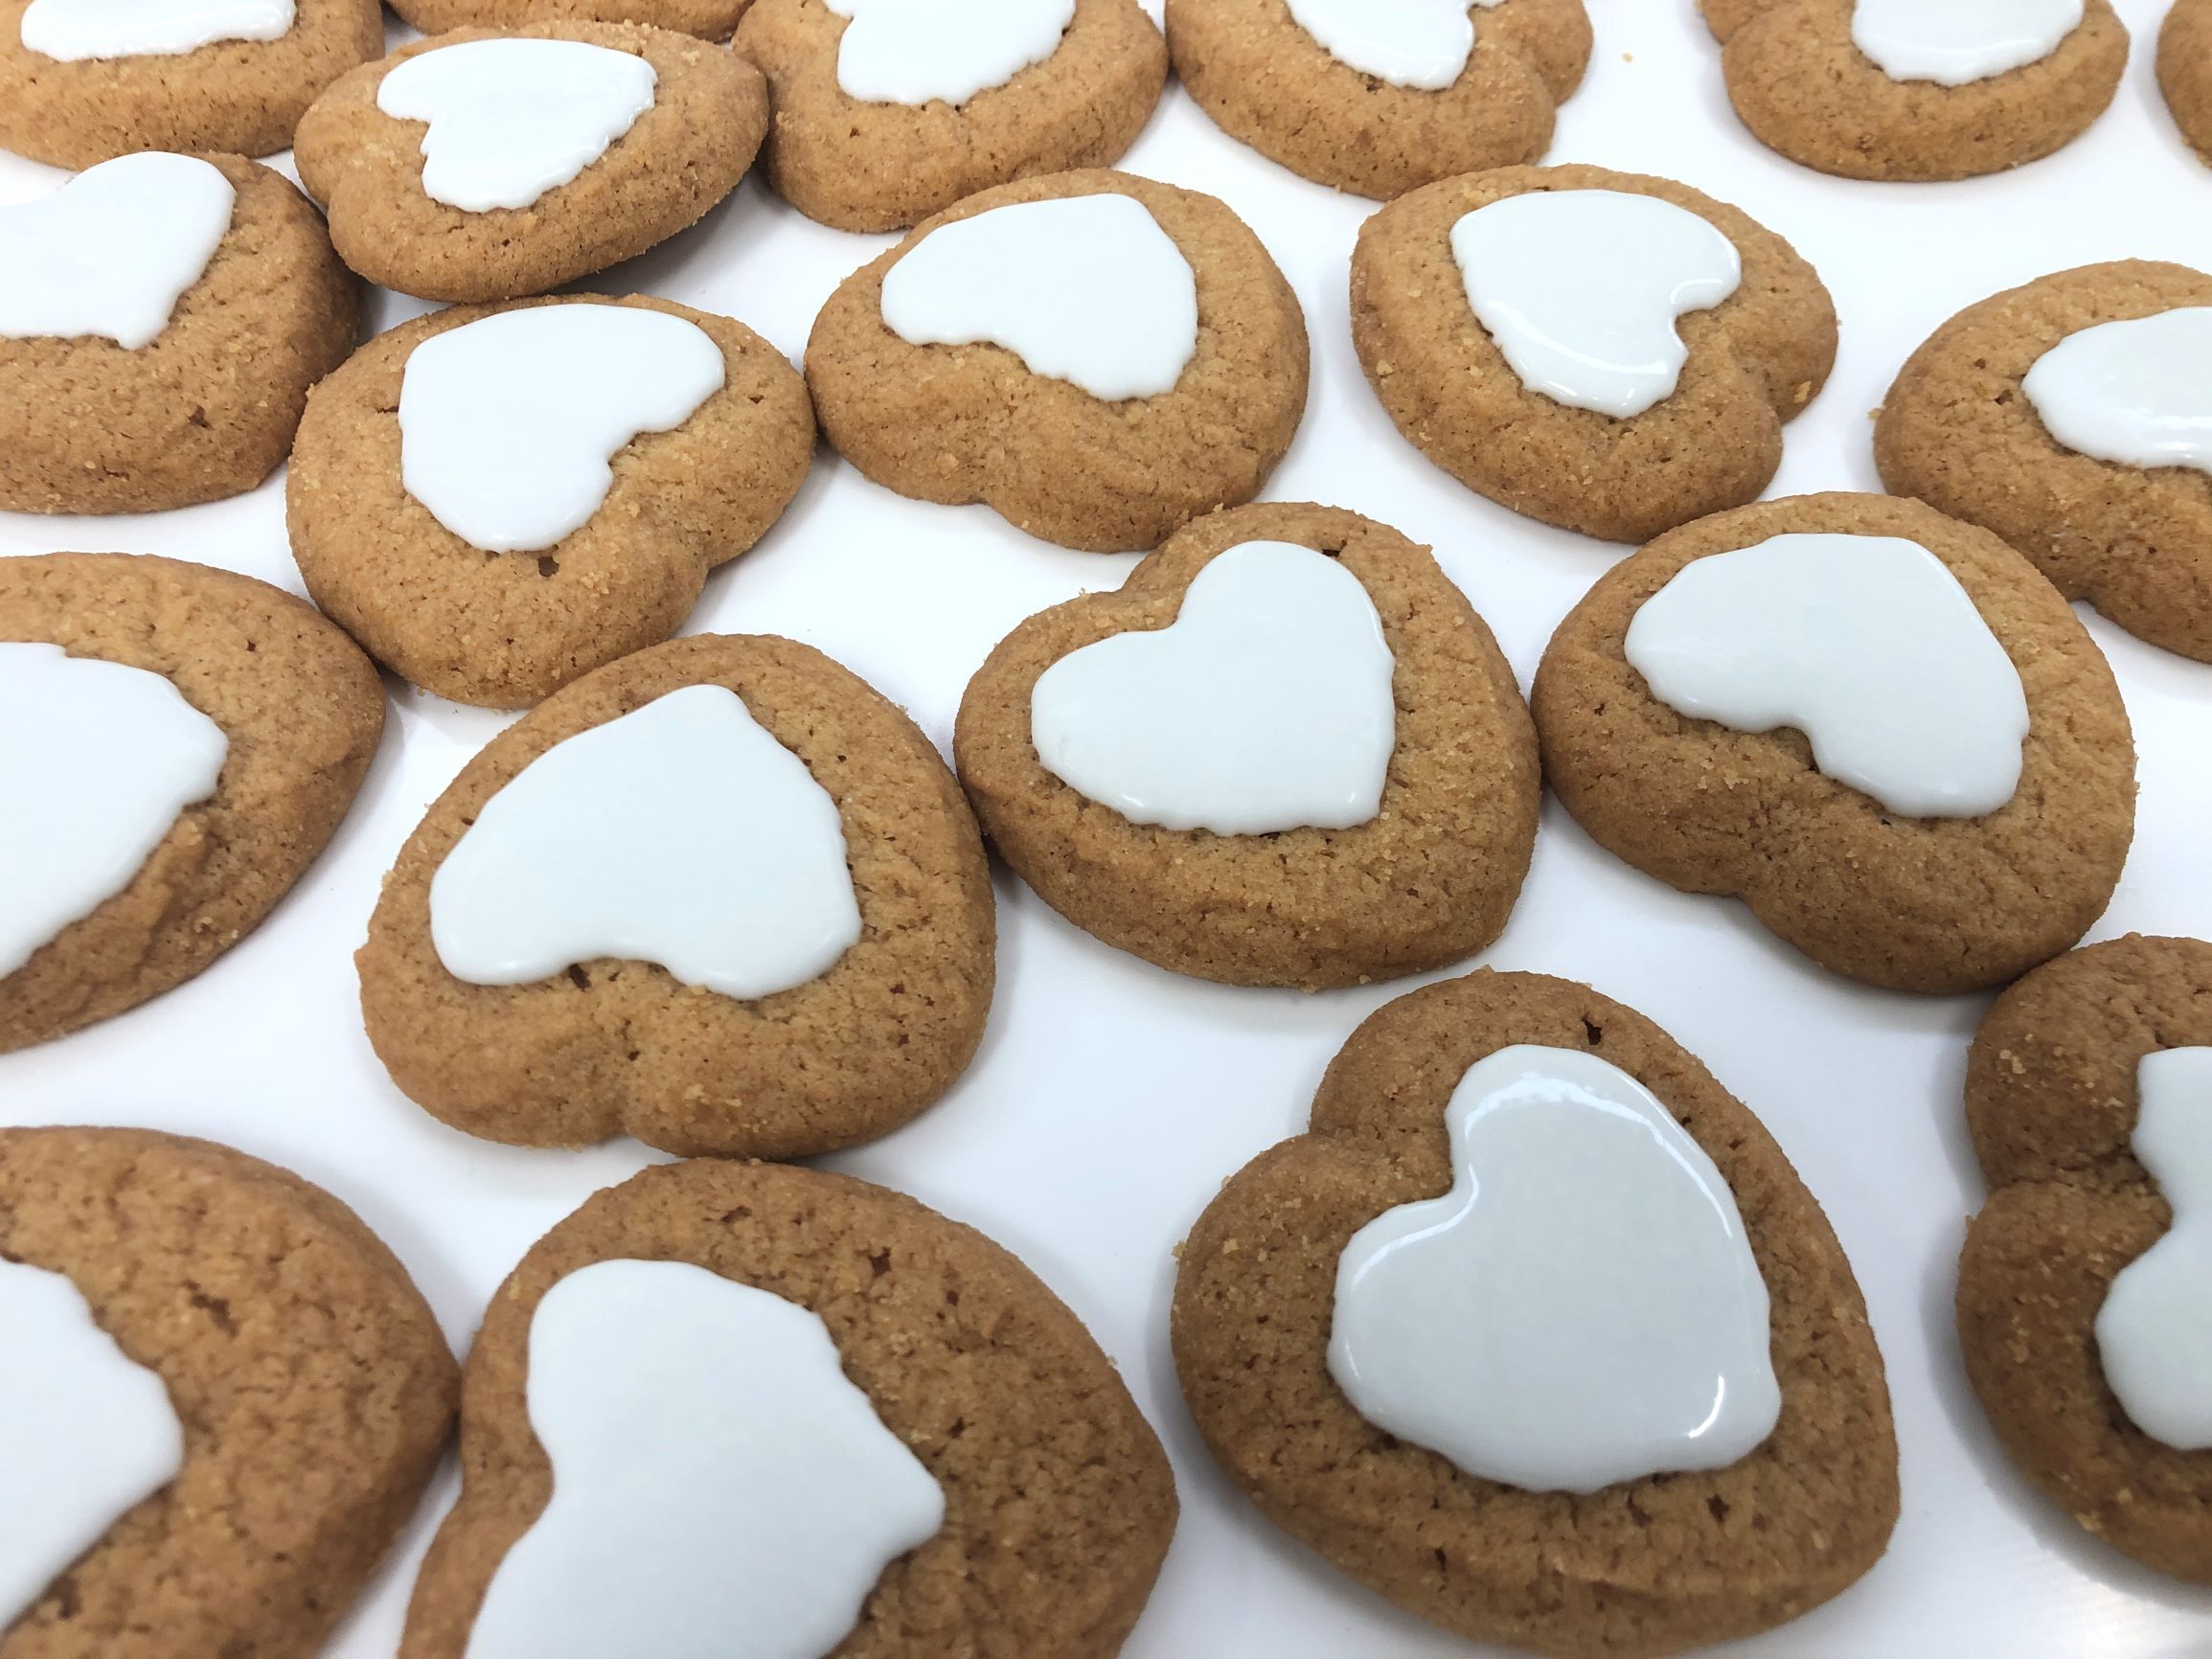 Heart-shaped biscuits decorated with white chocolate by FoodJet chocolate depositor